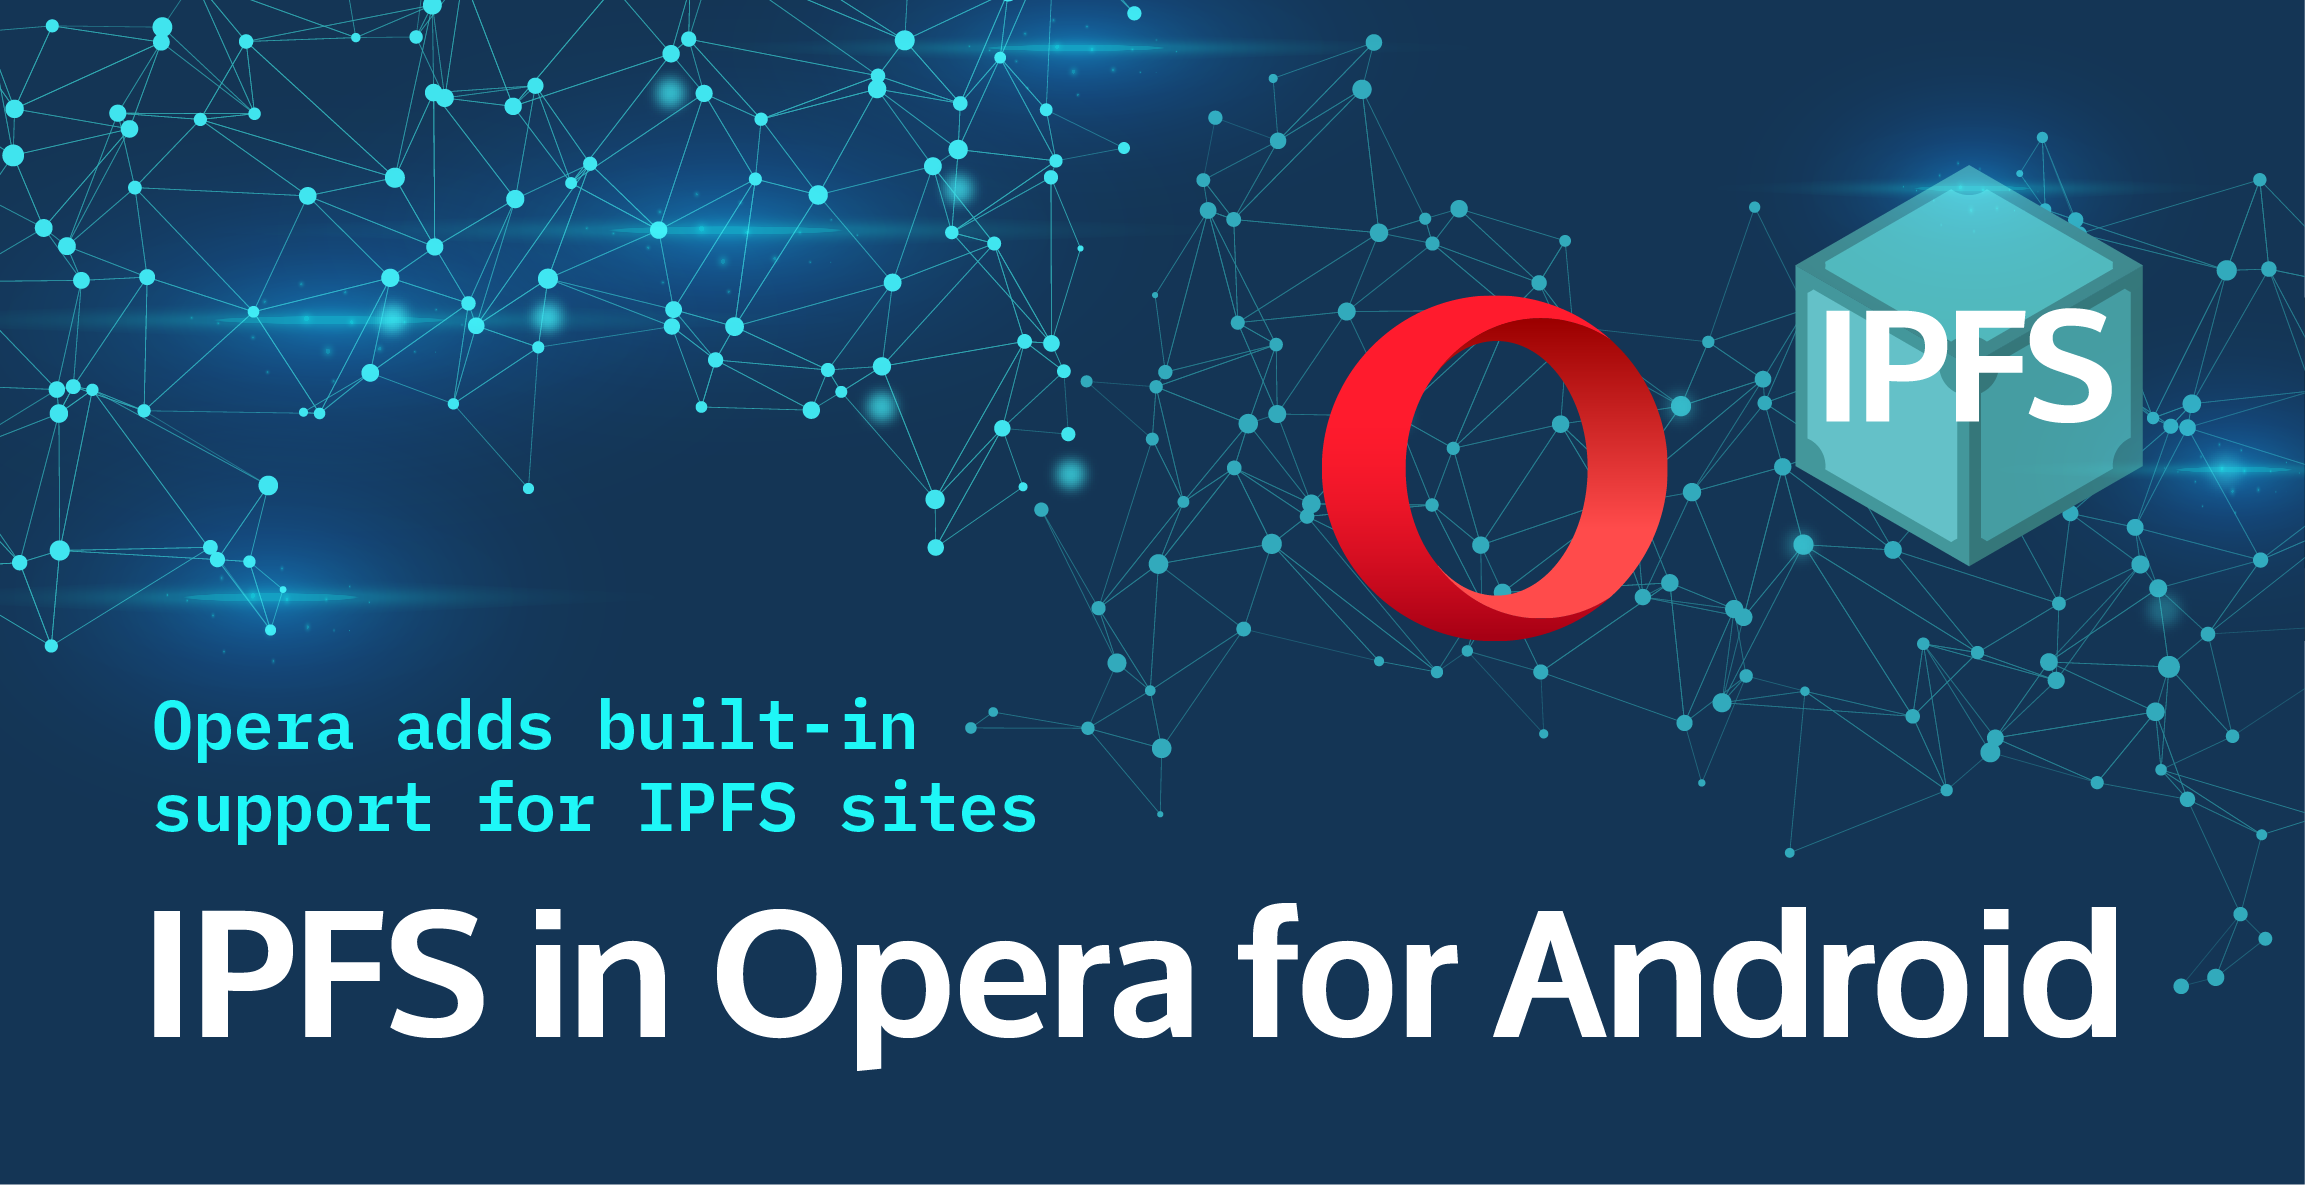 IPFS built-in to Opera for Android